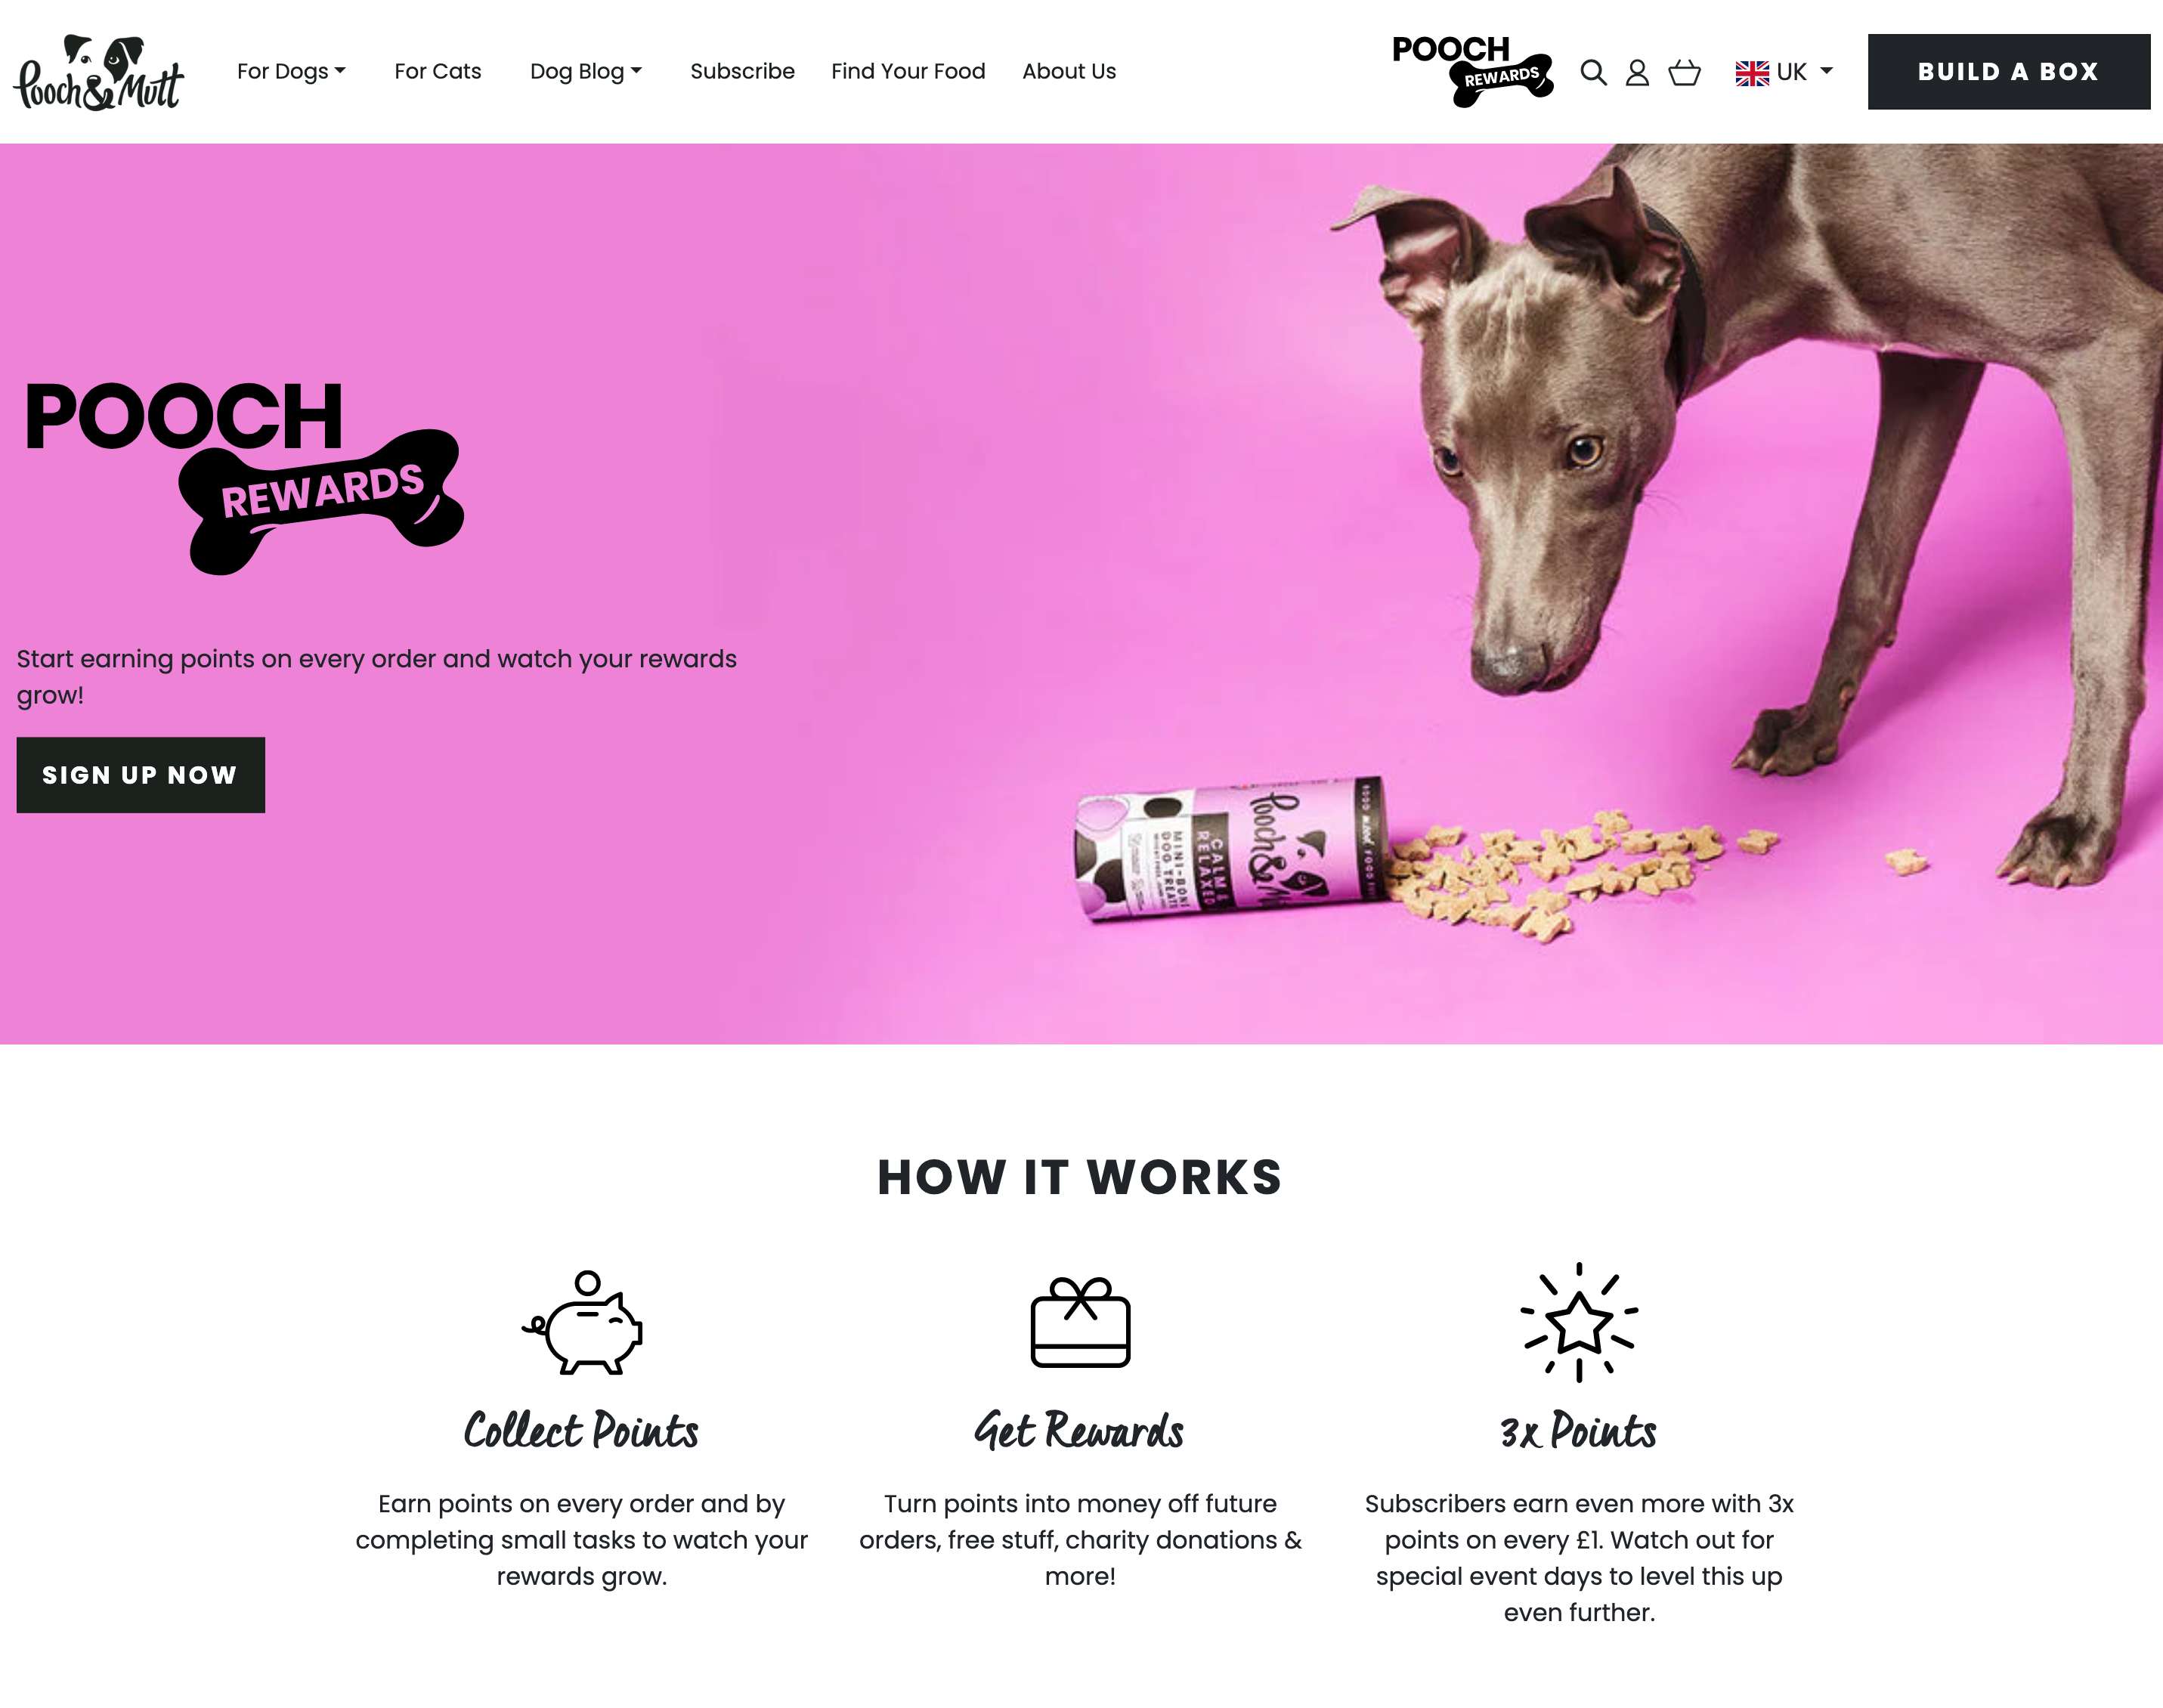 A screenshot showing above the fold on Pooch & Mutt's loyalty program landing page.